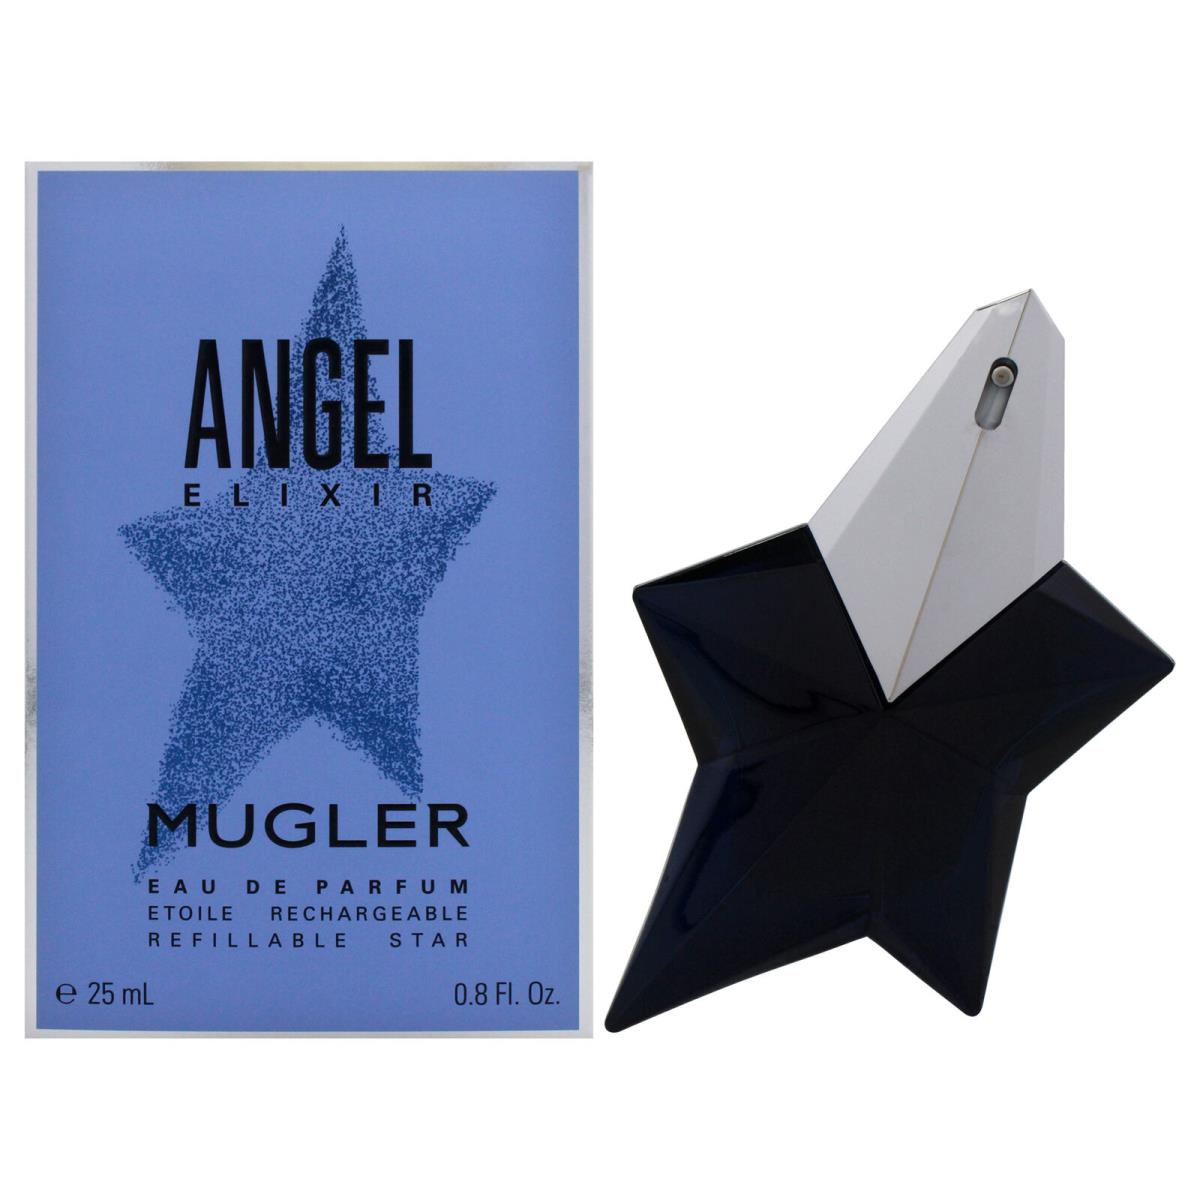 Angel Elixir by Thierry Mugler For Women - 0.8 oz Edp Spray Refillable